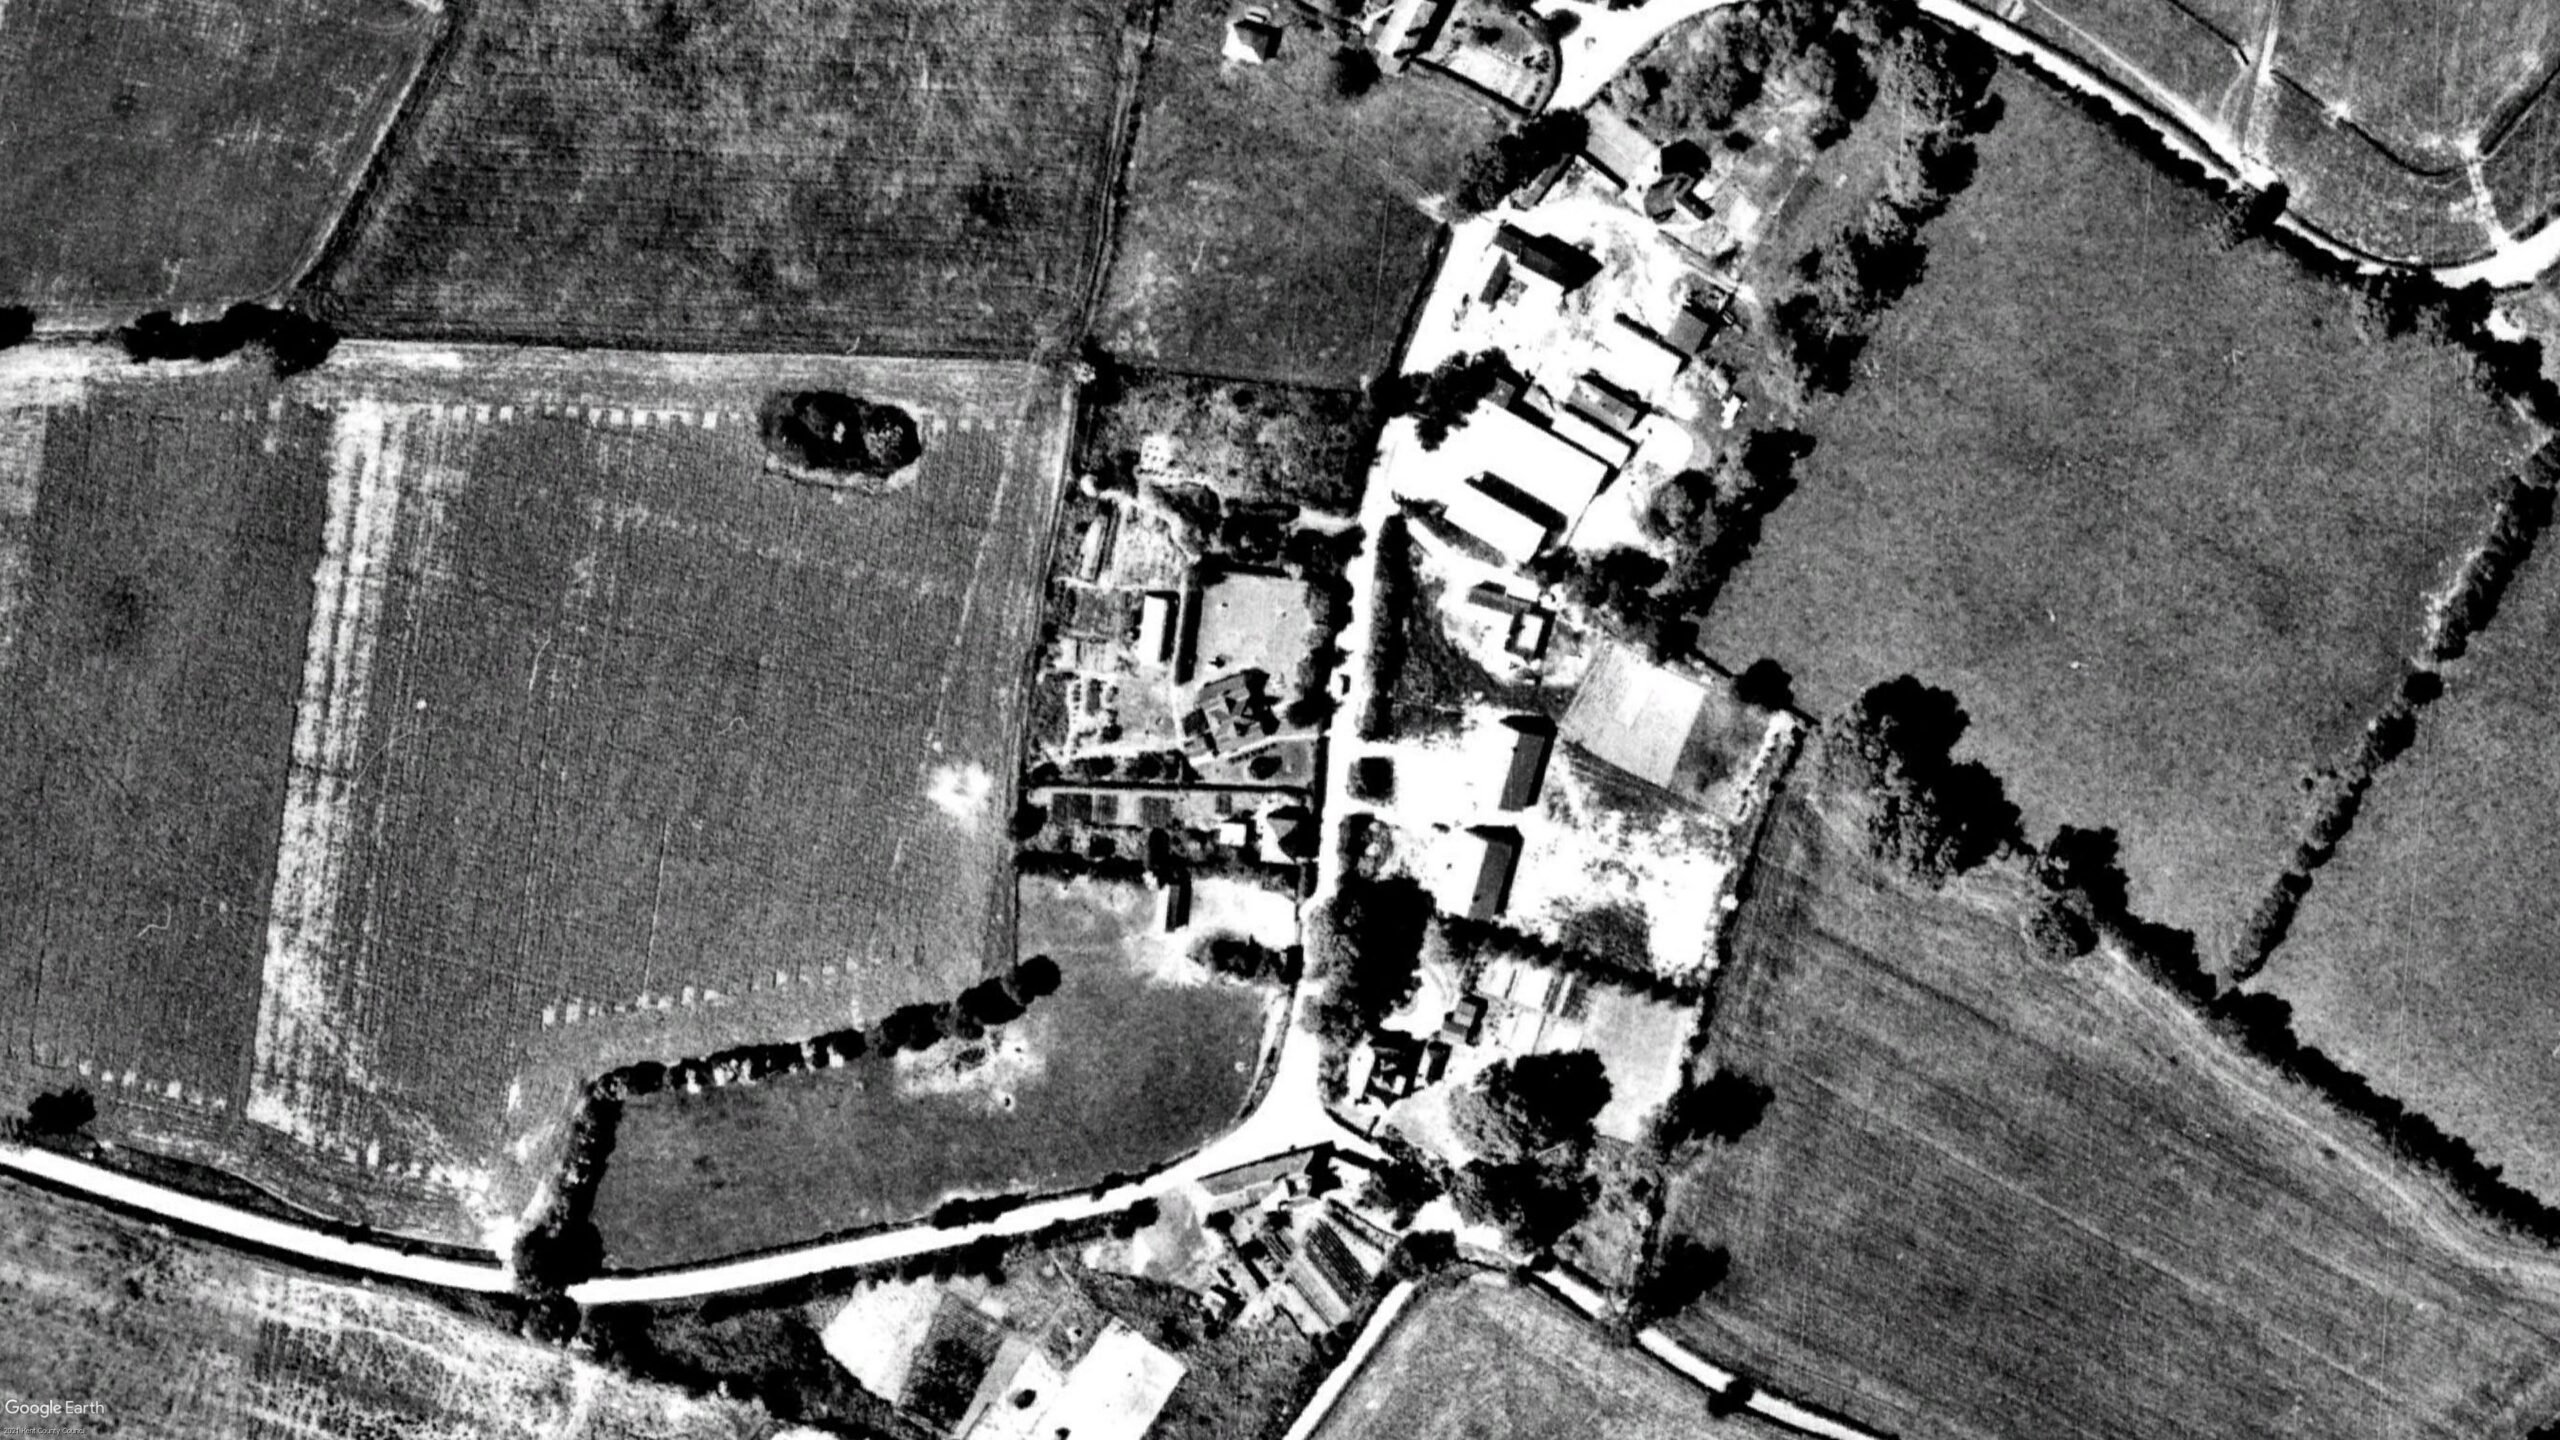 Aerial view of Millwall Football Clubs training ground, and the